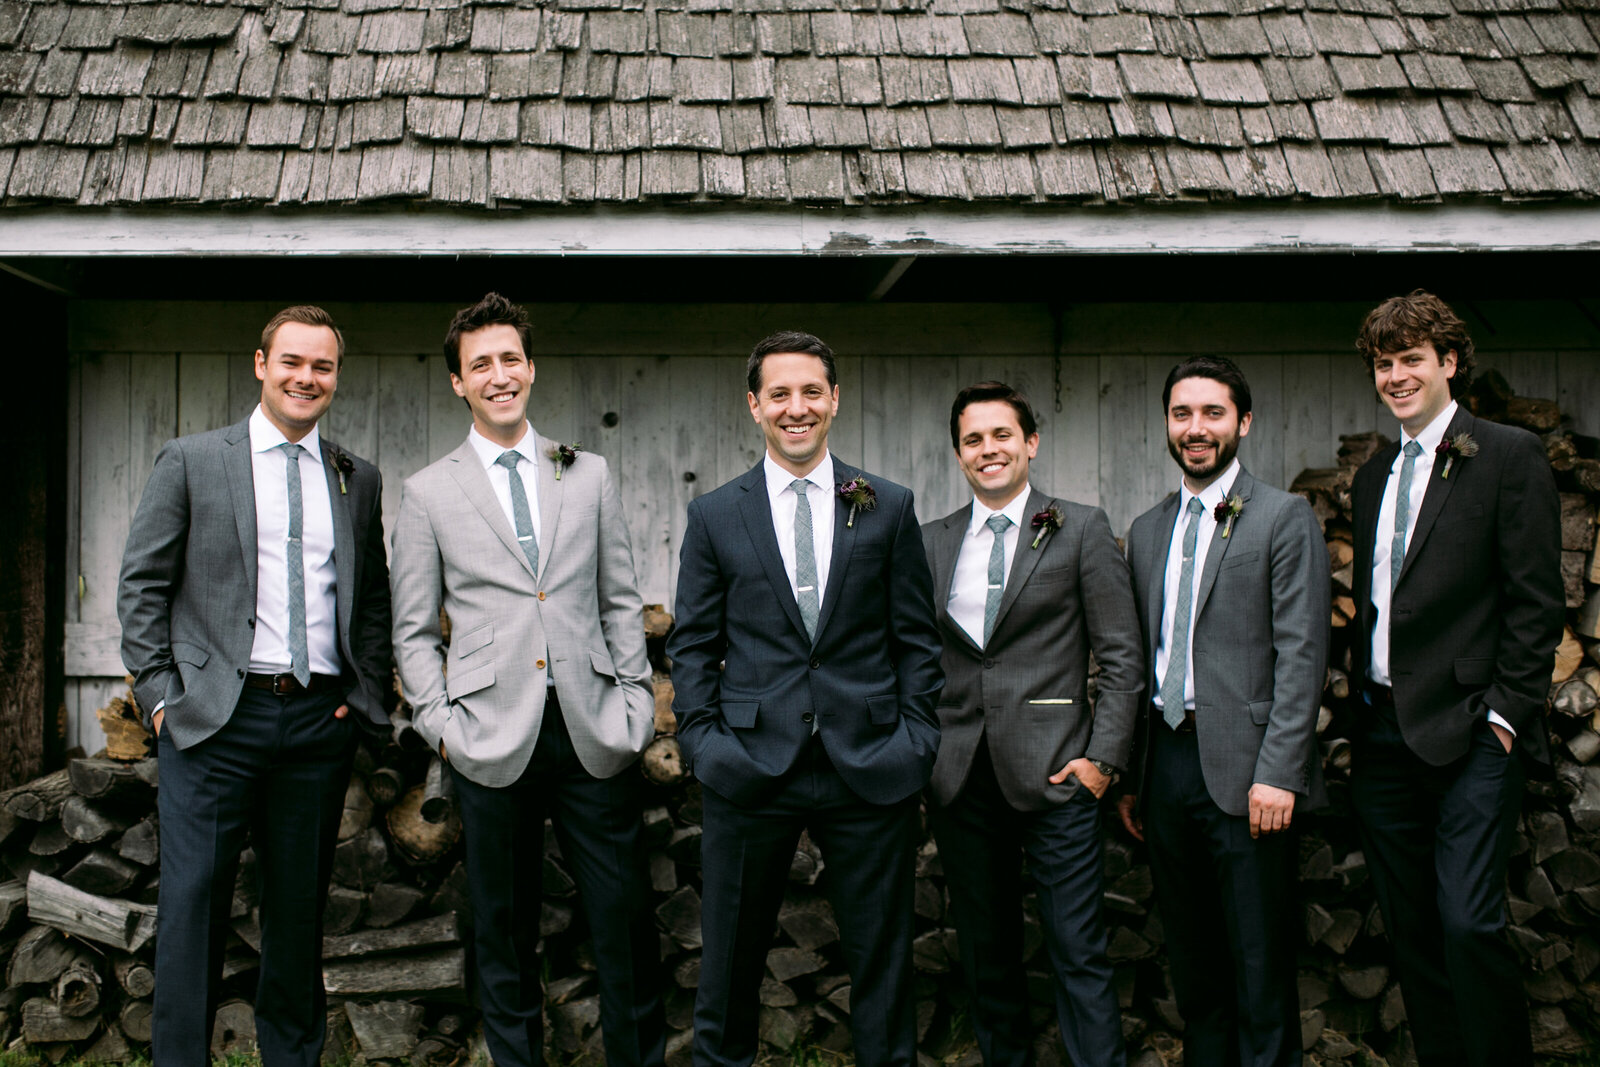 groomsmen at barn with wood pile